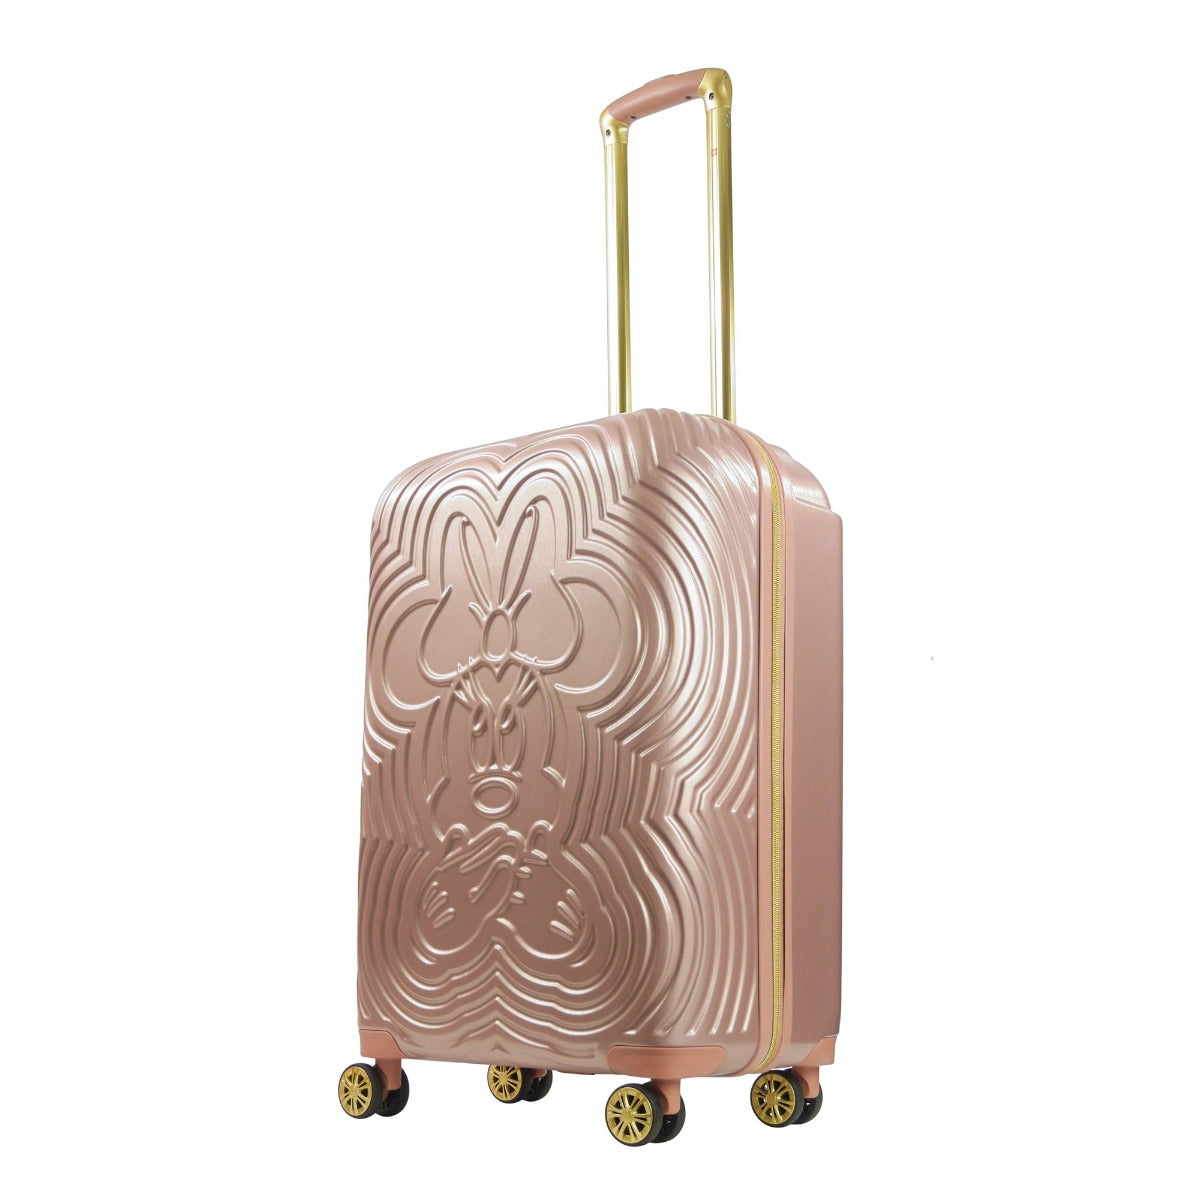 Disney Ful Playful Minnie Mouse 26 inch spinner suitcase hard sided luggage rose gold